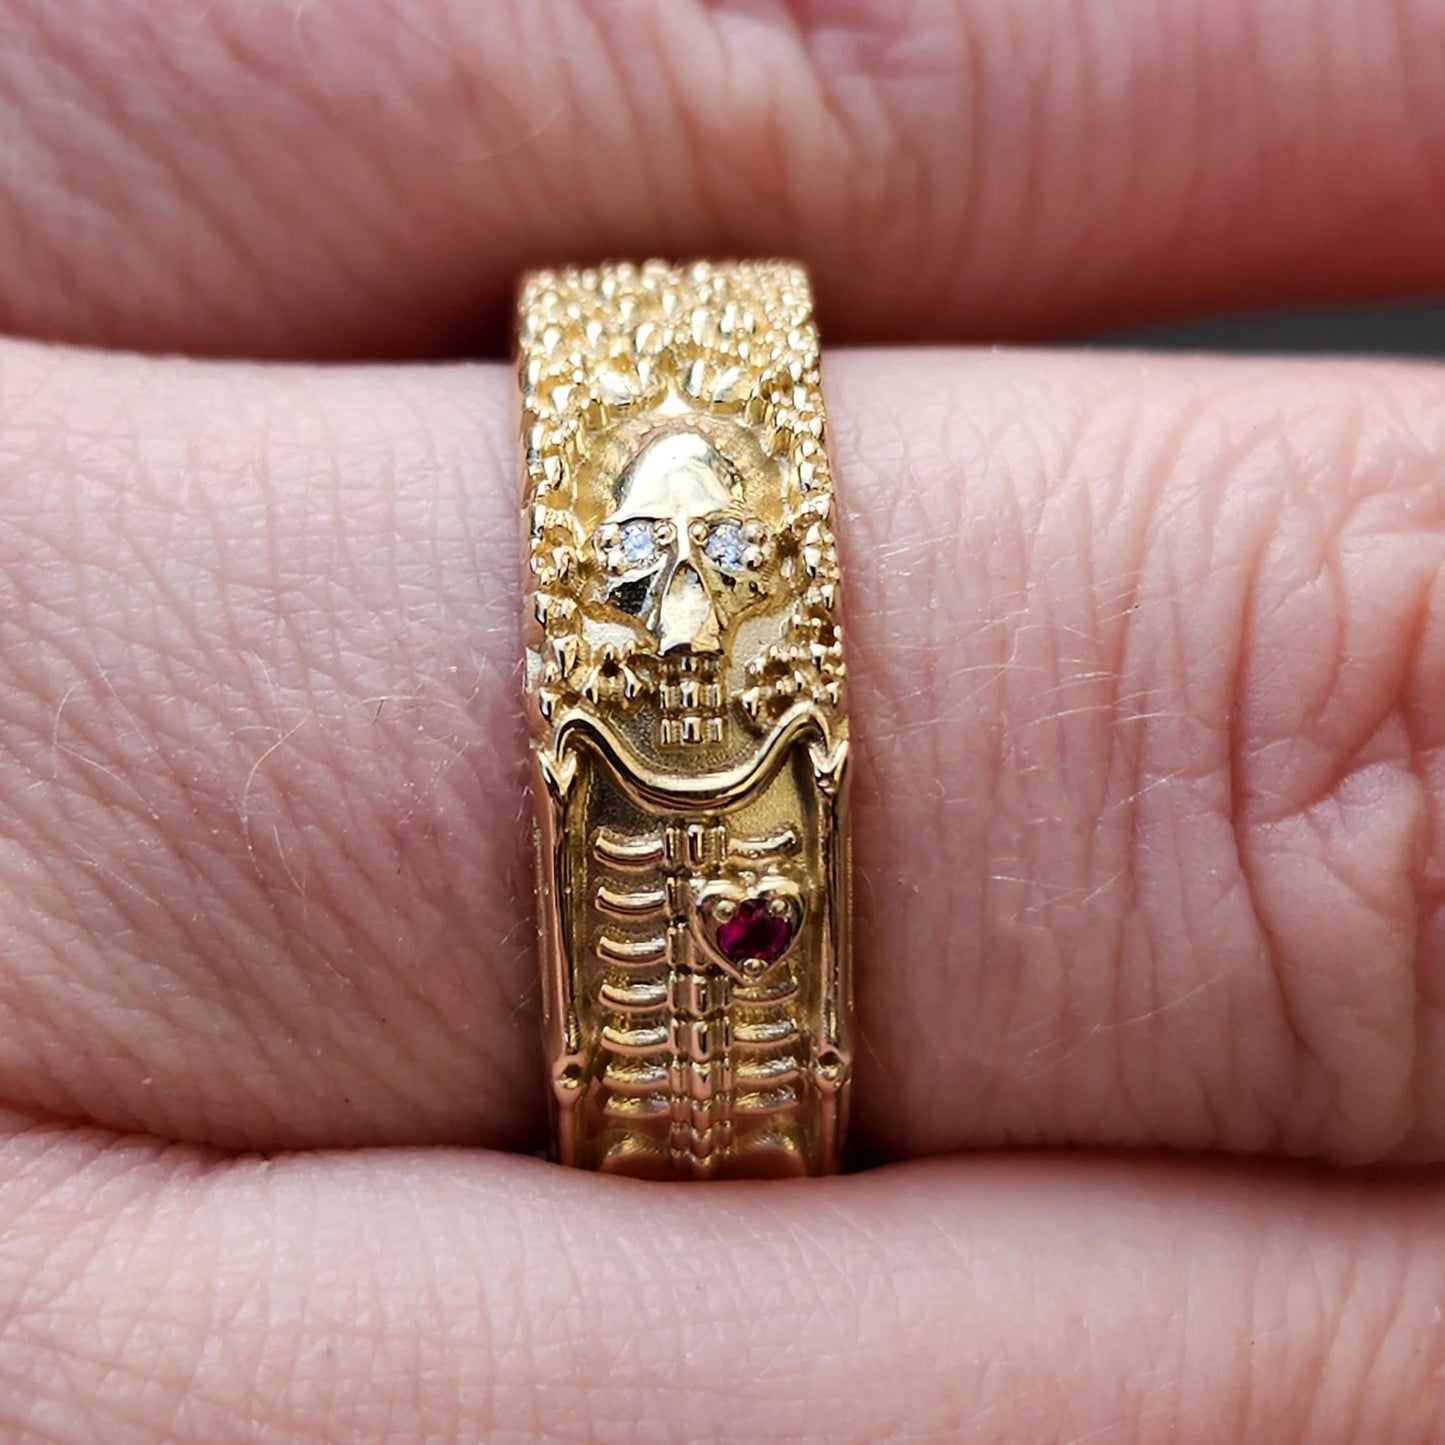 Buy 22K Gold Casting Lord Venkateswara Ring 93VC2207 Online from Vaibhav  Jewellers